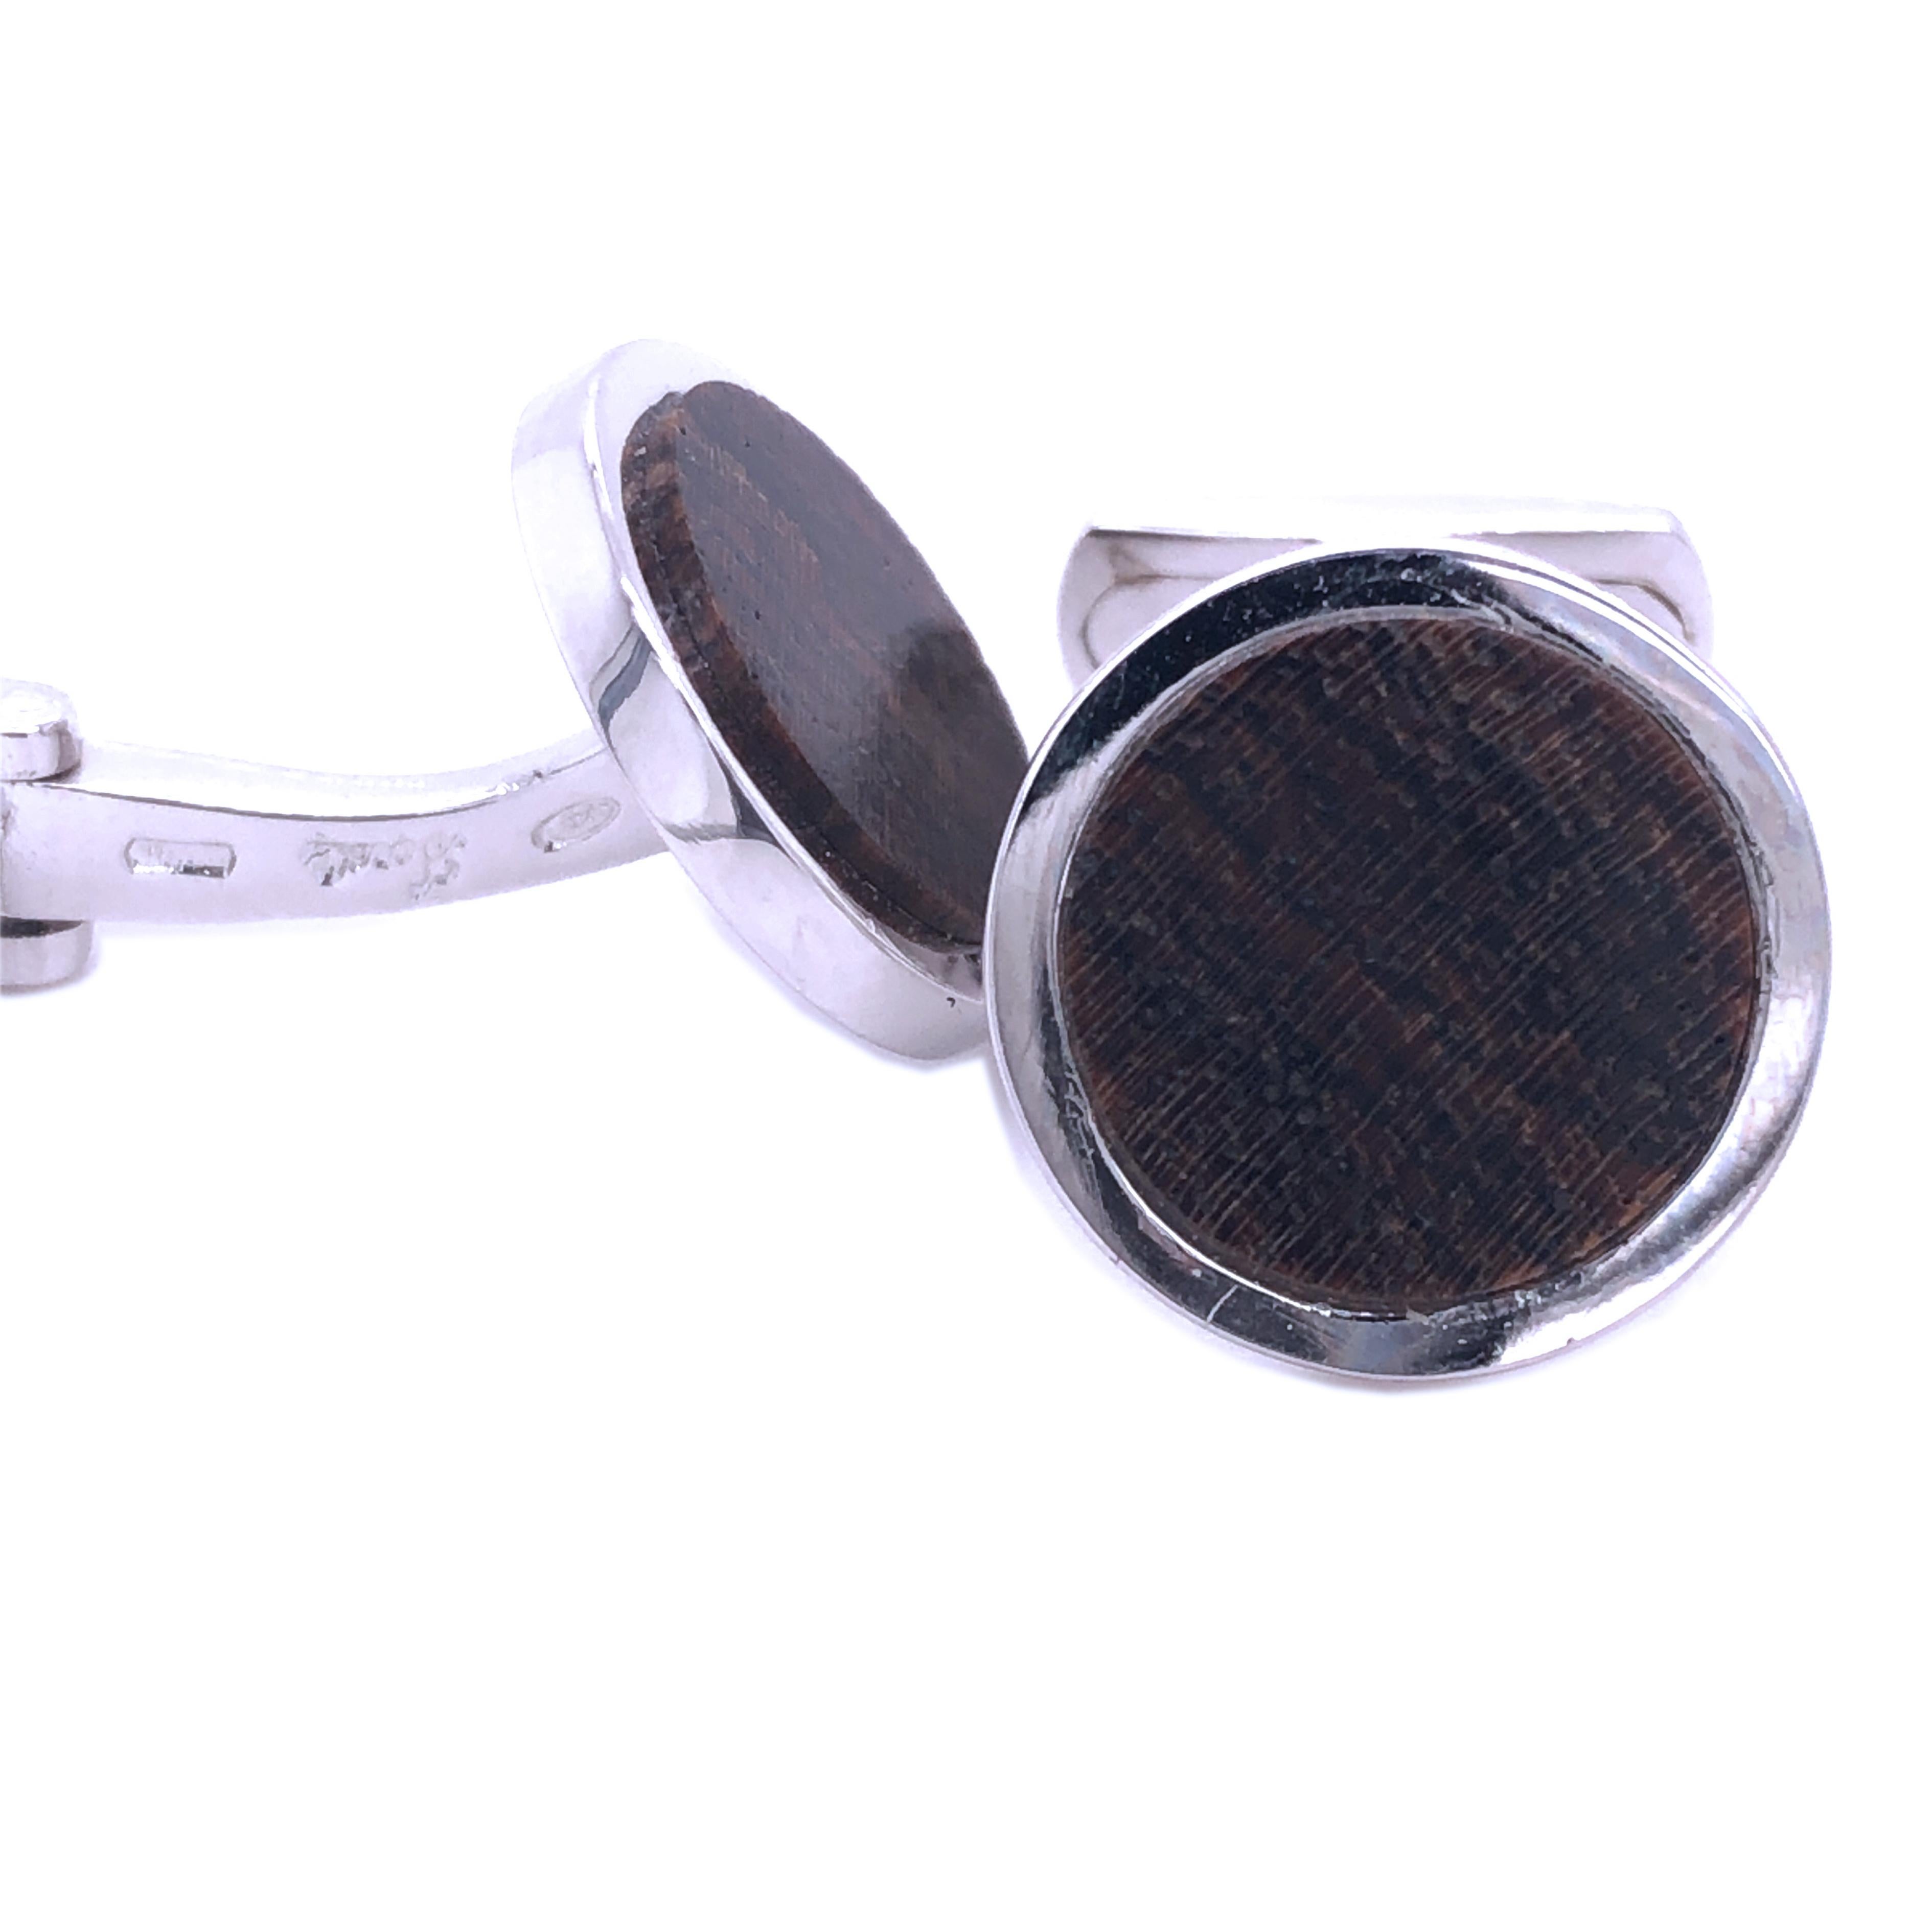 Chic and Timeless, Natural Hand Inlaid Acacia Wood Disk Round Shaped Sterling Silver Cufflinks, T-bar back.
In our smart fitted Black Box and Pouch.

